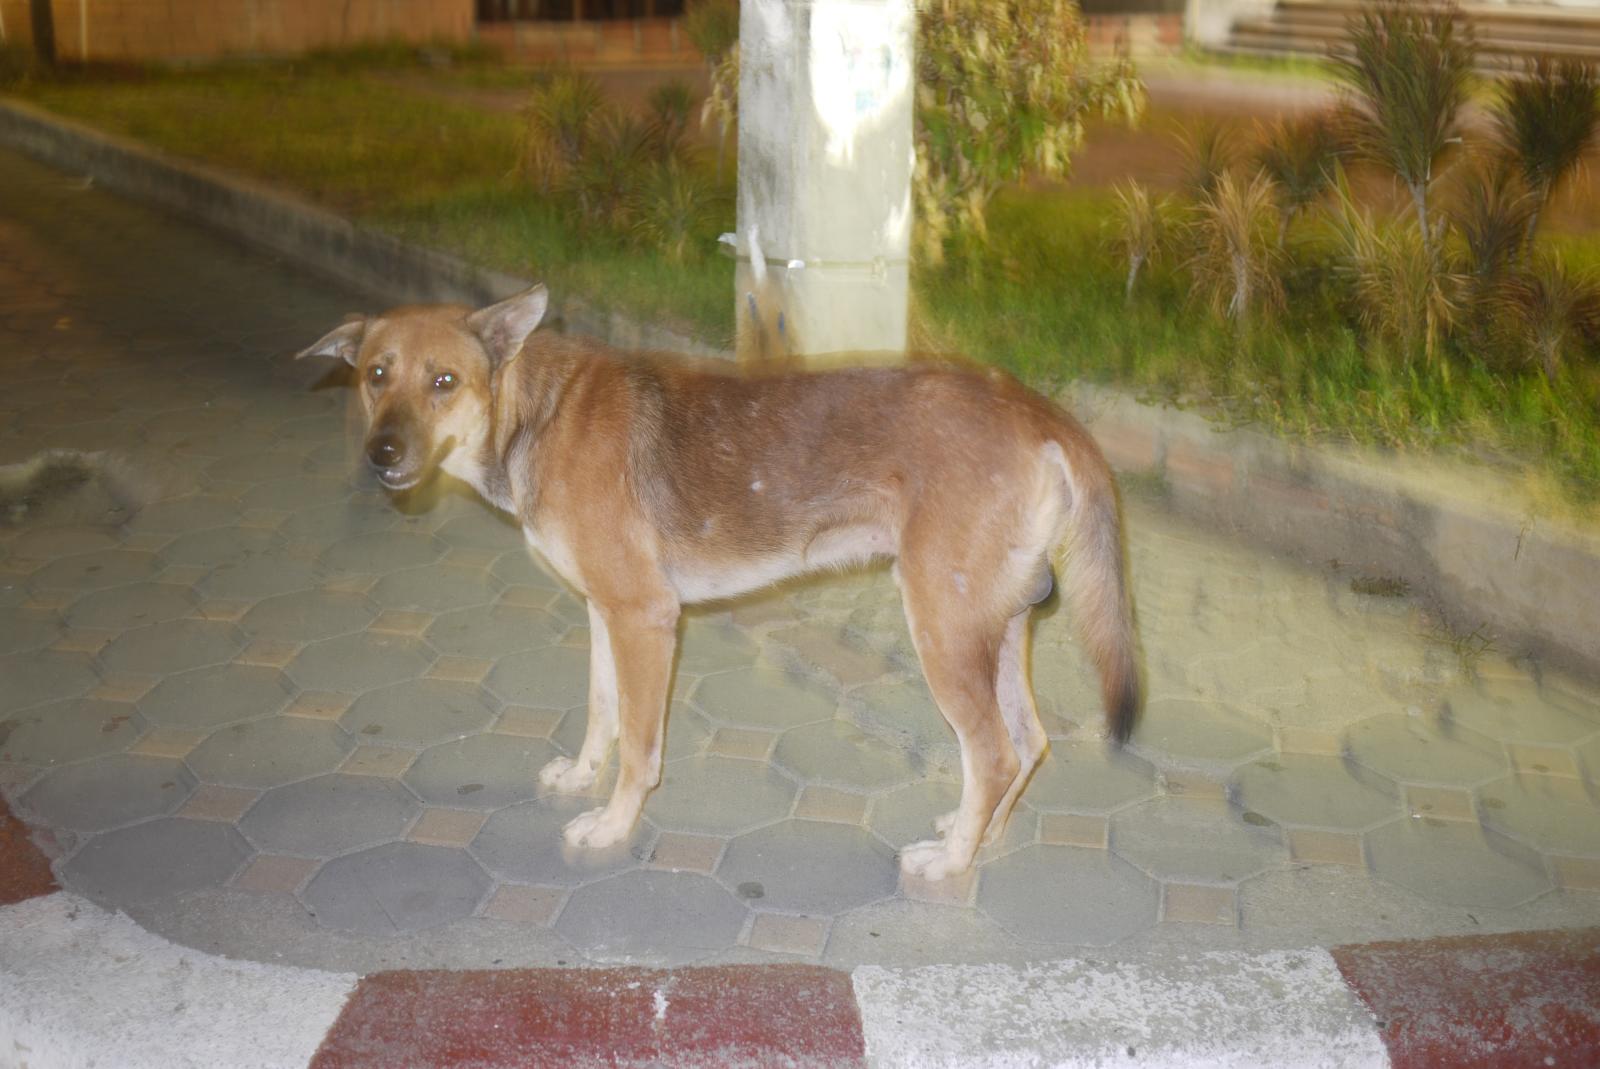 a dog standing on pavement by curb near grass